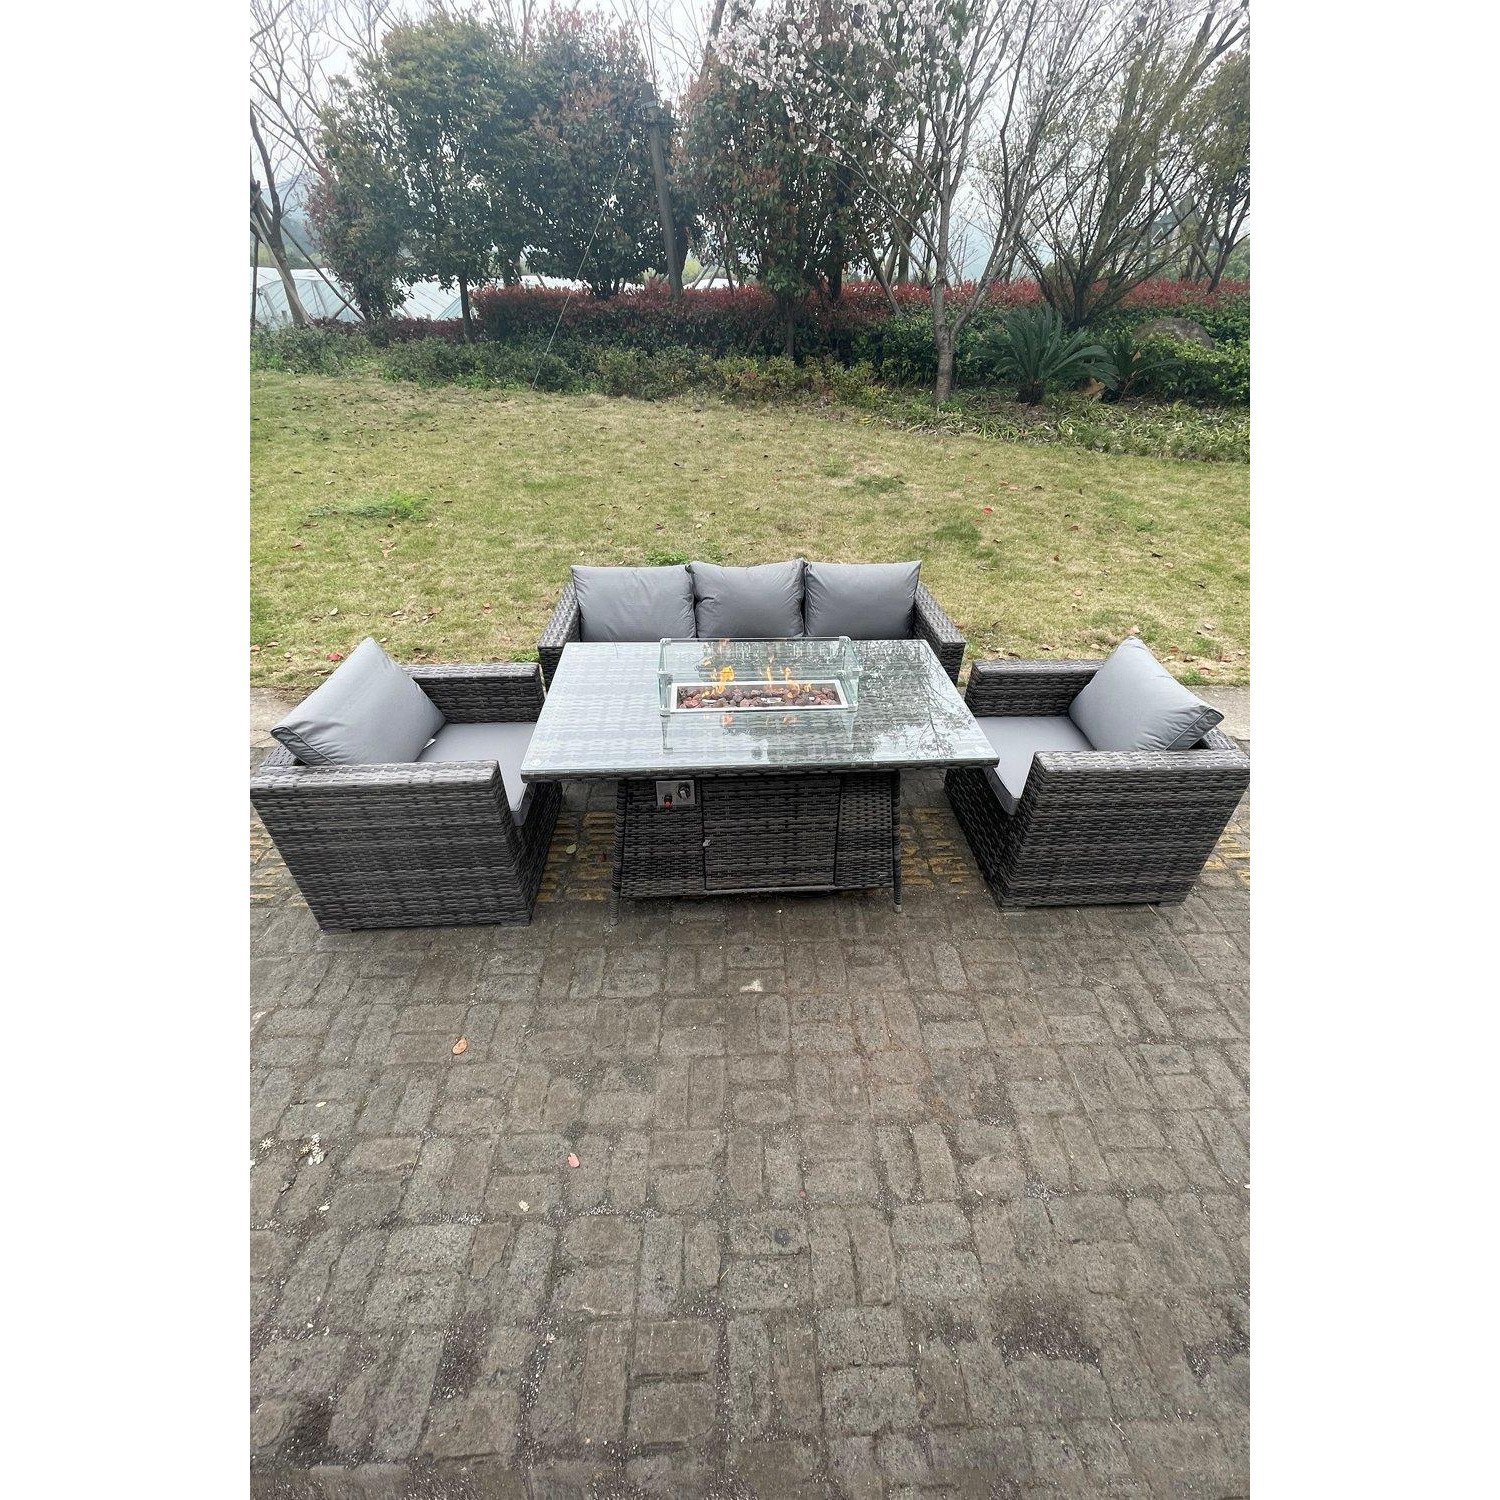 5 Seater Outdoor PE Rattan Garden Furniture Gas Fire Pit Dining Table Lounge Sofa 2 PC Armchairs - image 1